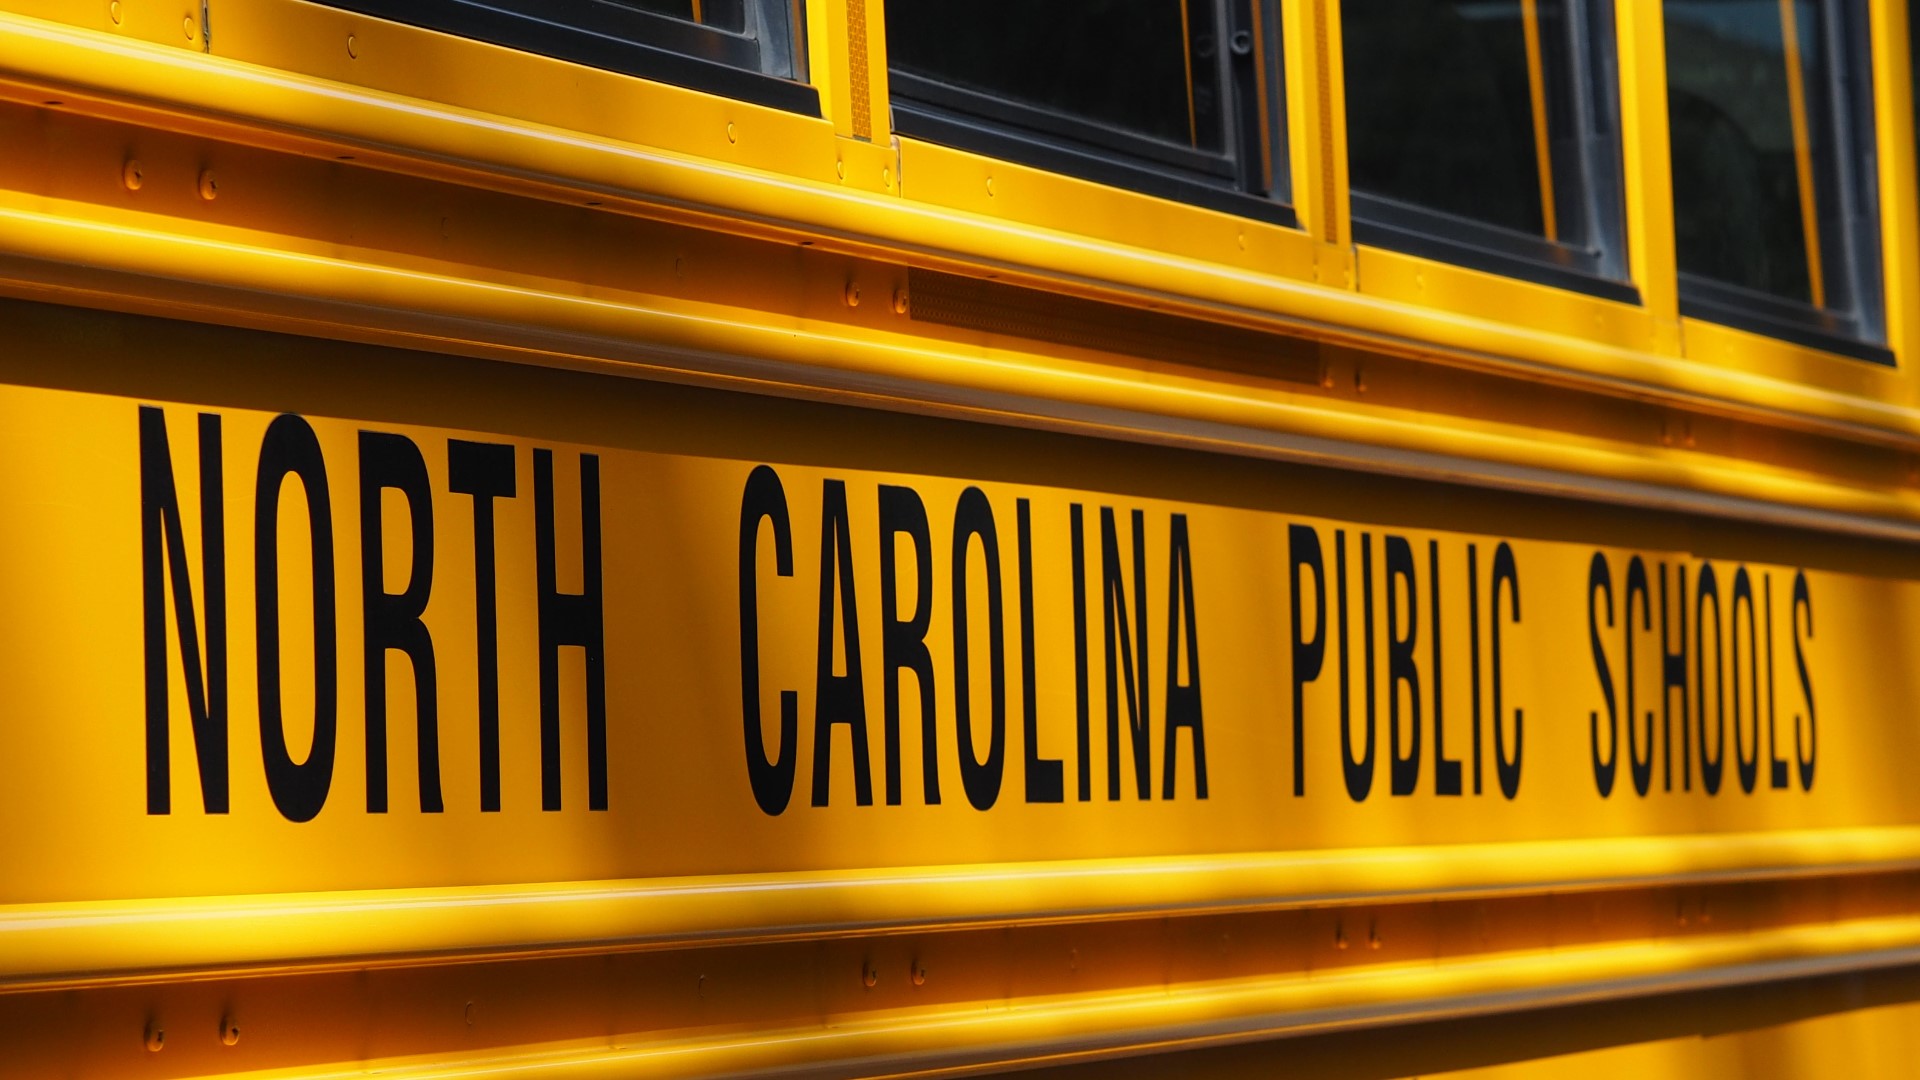 Starting pay for Charlotte-Mecklenburg Schools bus drivers is $15.75 an hour and part-time drivers will receive benefits.